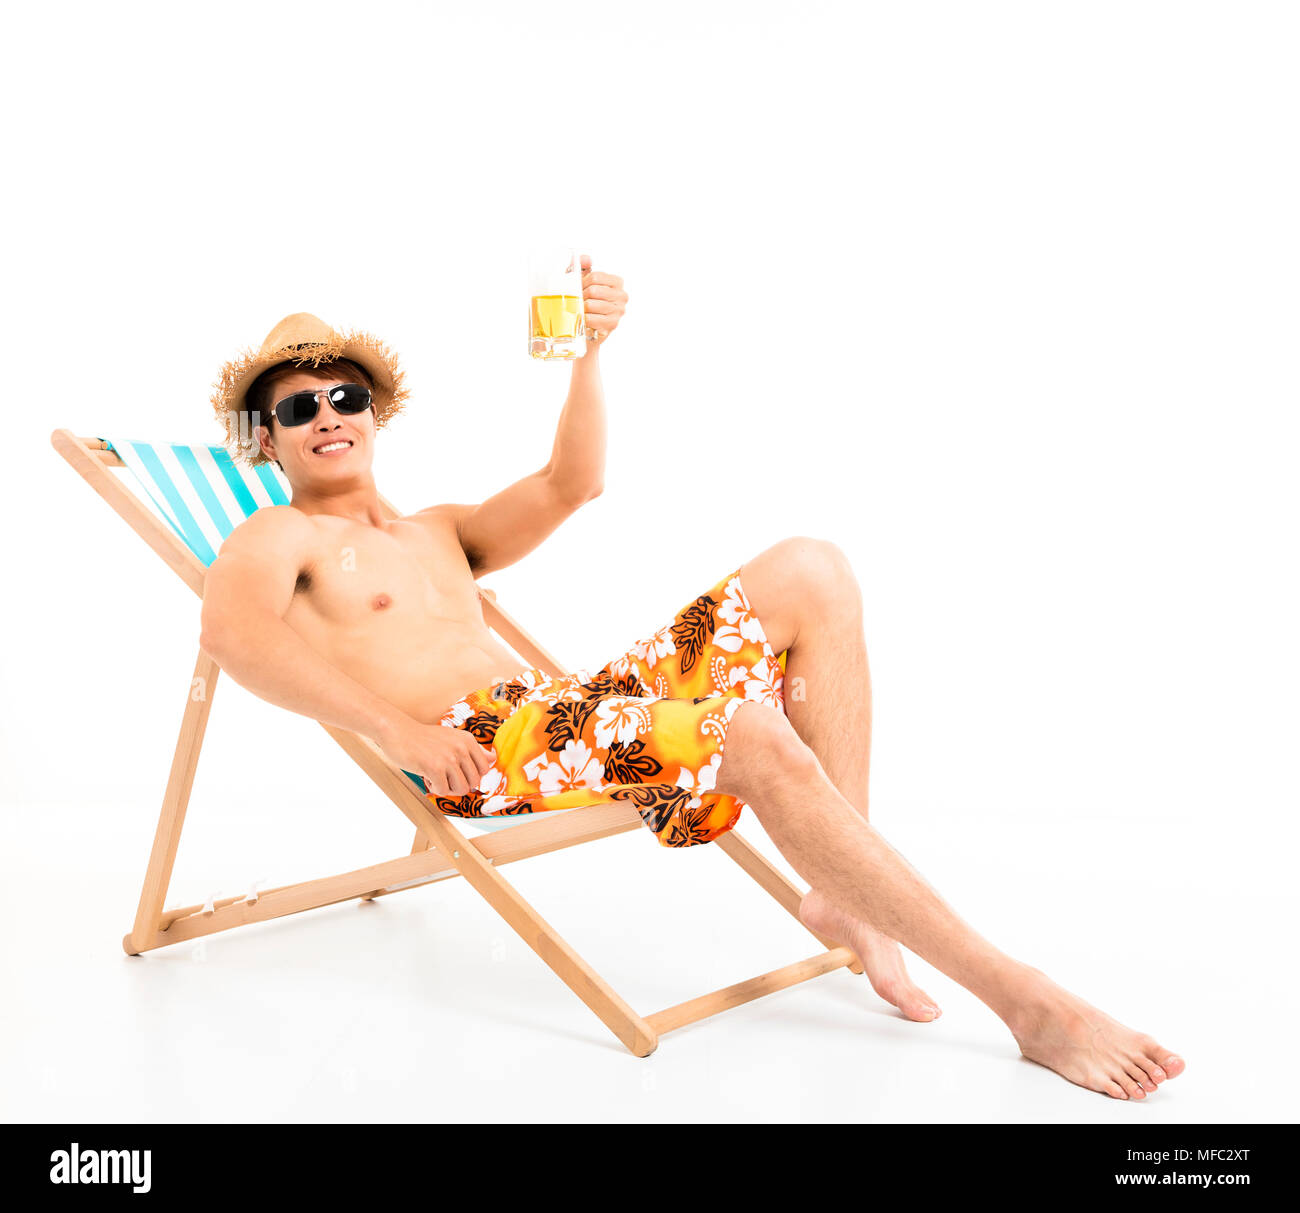 Relaxed man sitting in lounger chair and drinking beer Stock Photo